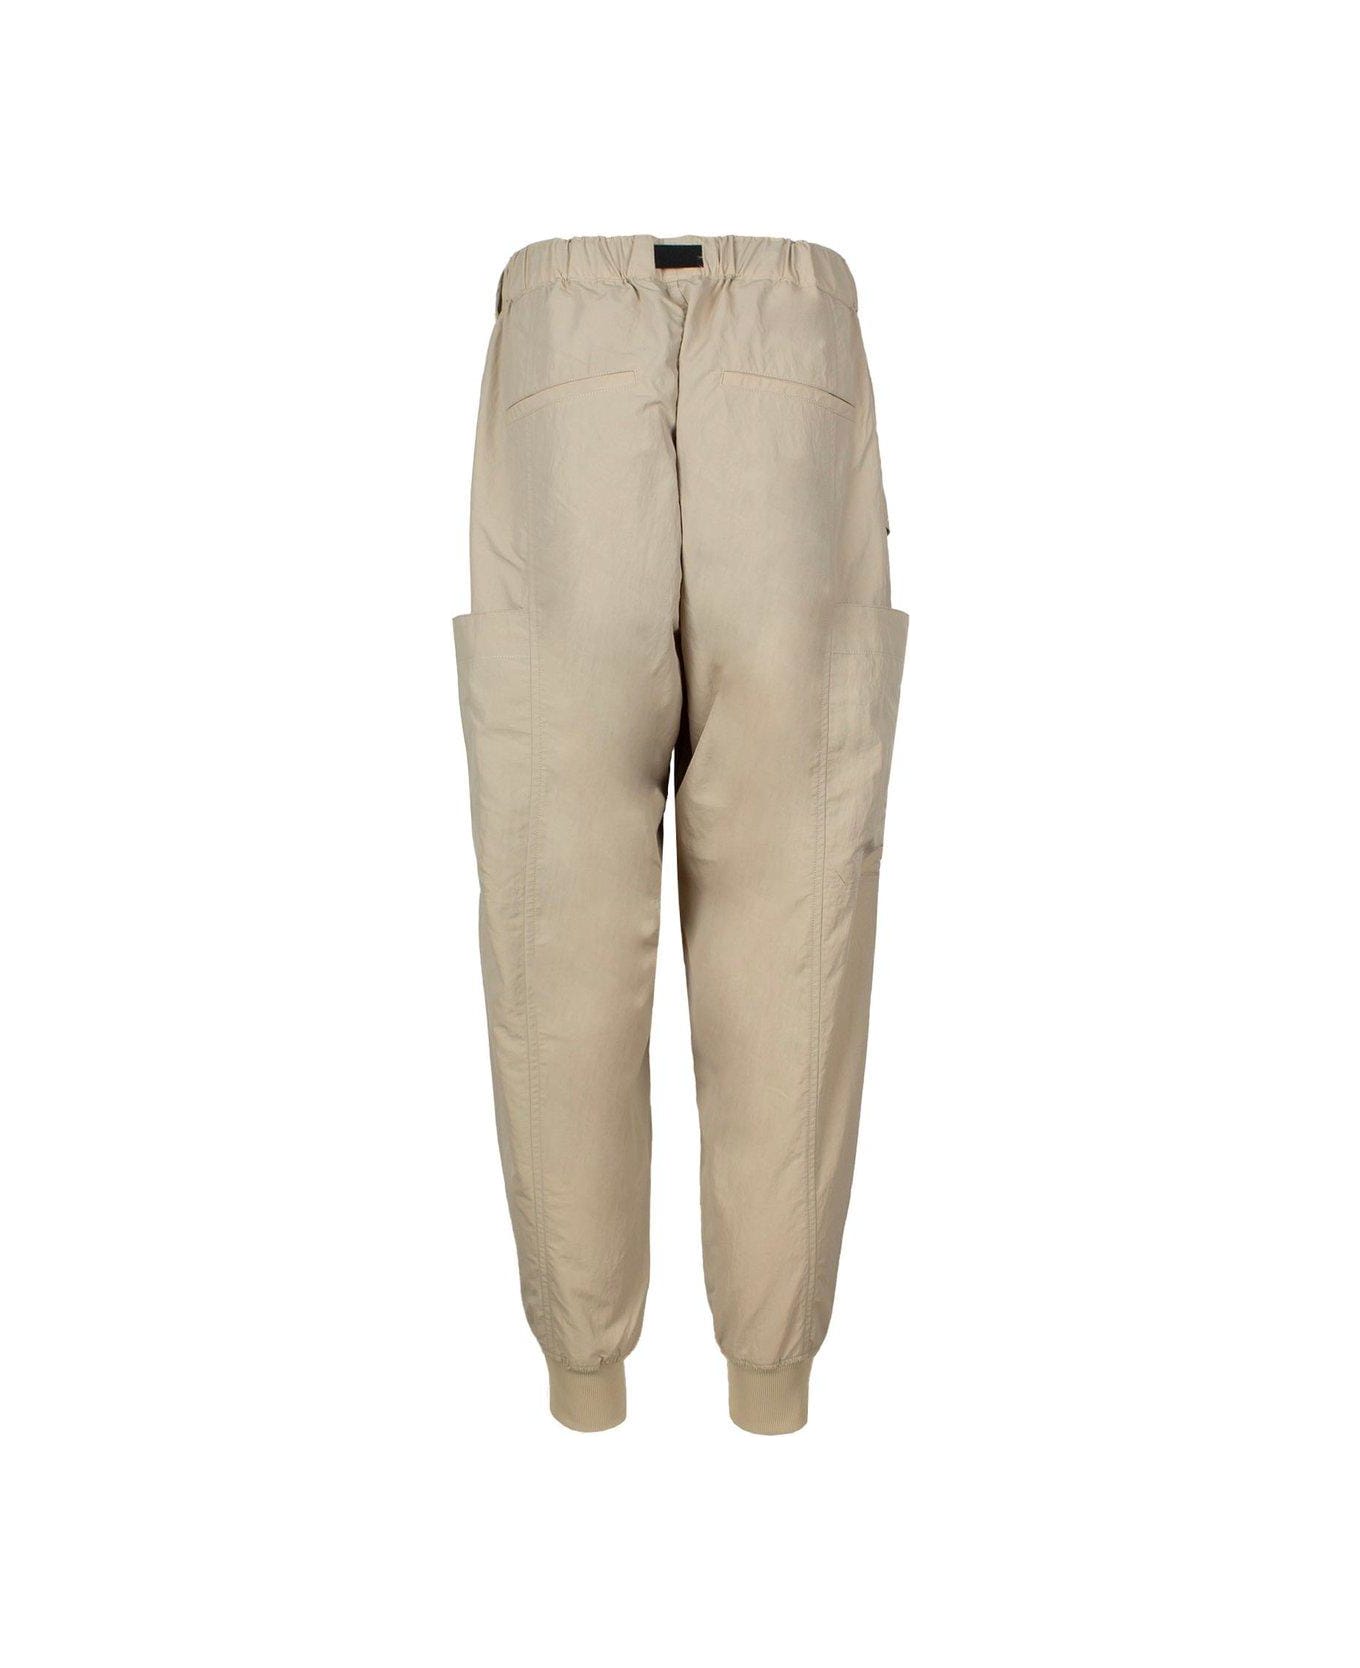 Y-3 Belted Crinkled Track Pants スウェットパンツ